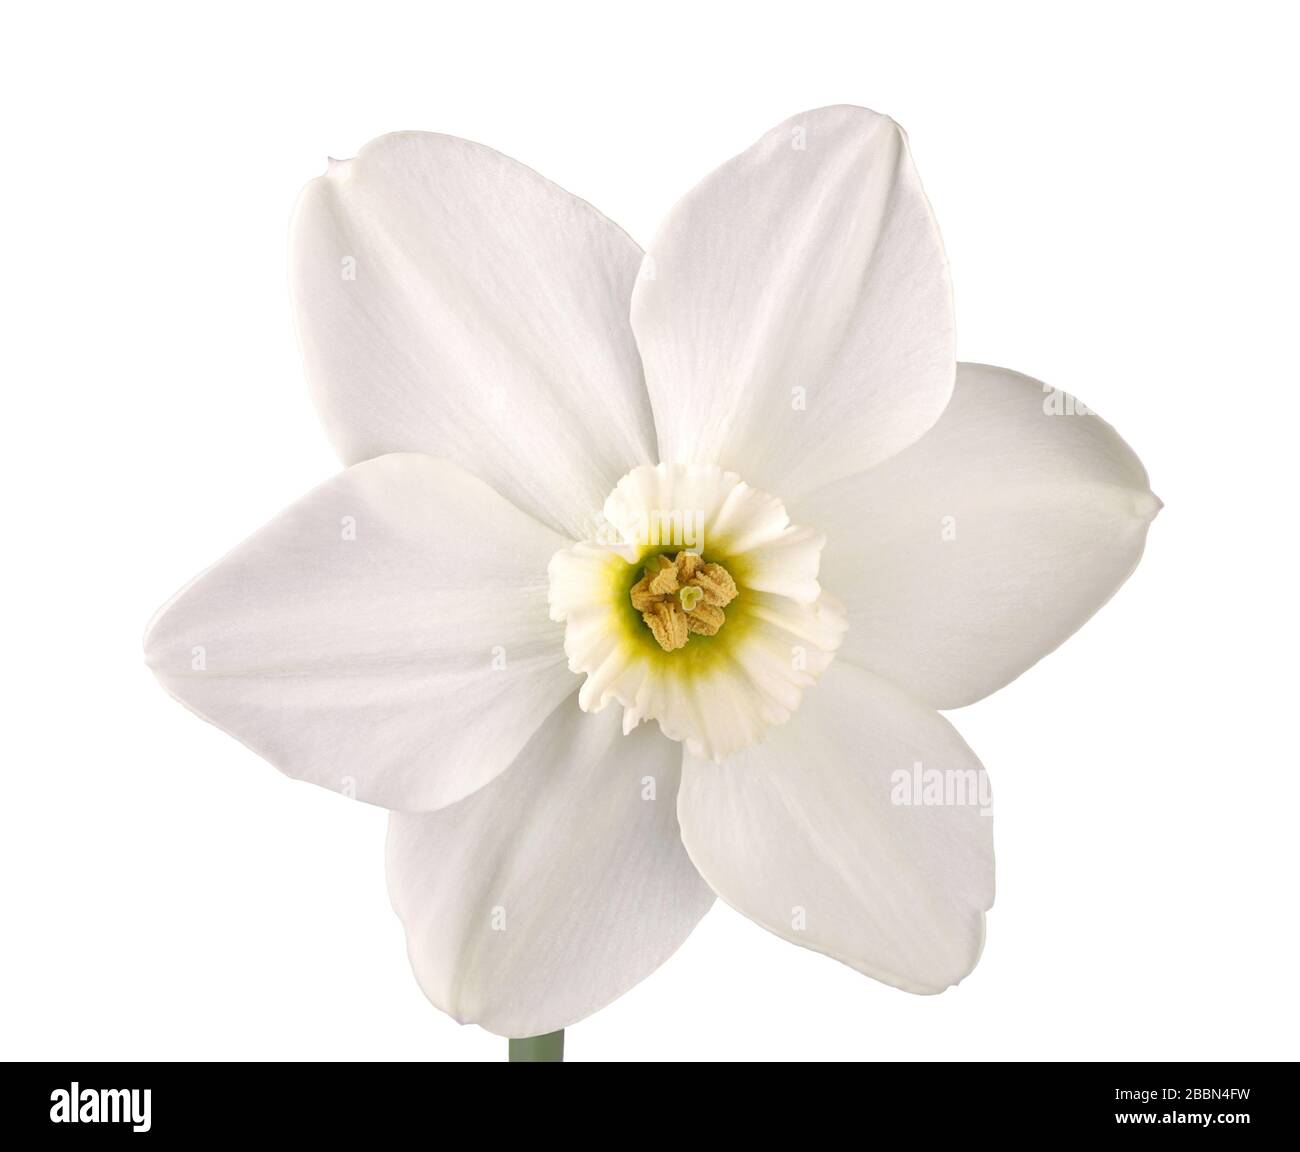 Single flower and stem of the green-eyed, small-cup daffodil cultivar Emerald Stone isolated against a white background Stock Photo